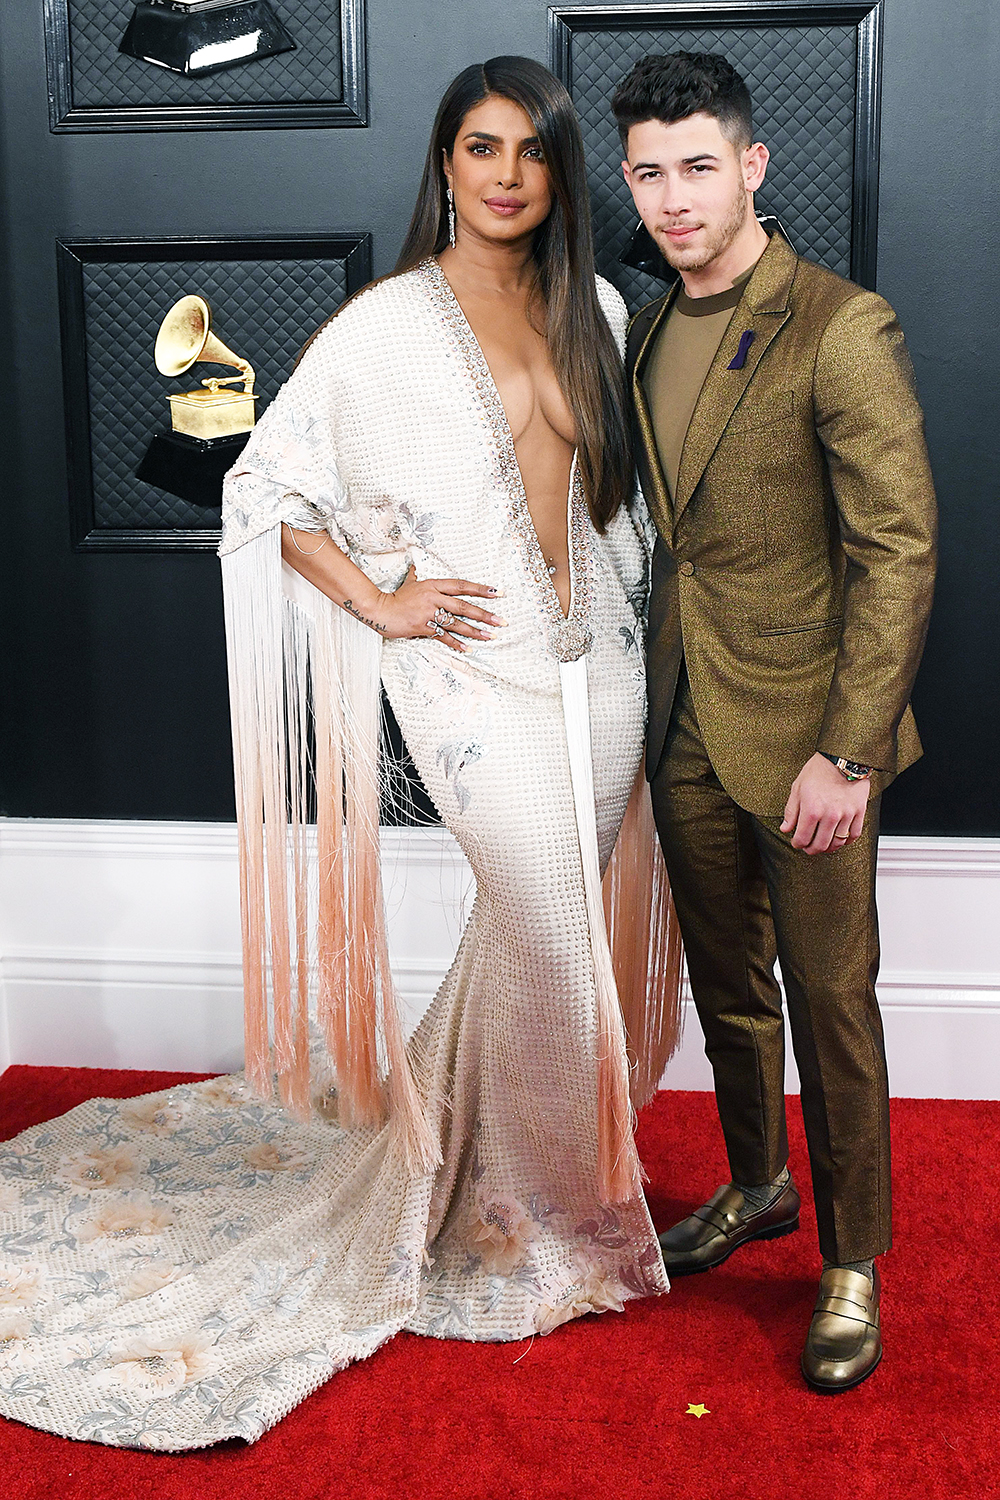 Priyanka Chopra left little to the imagination with her majorly plunging dress at the 2020 Grammys.